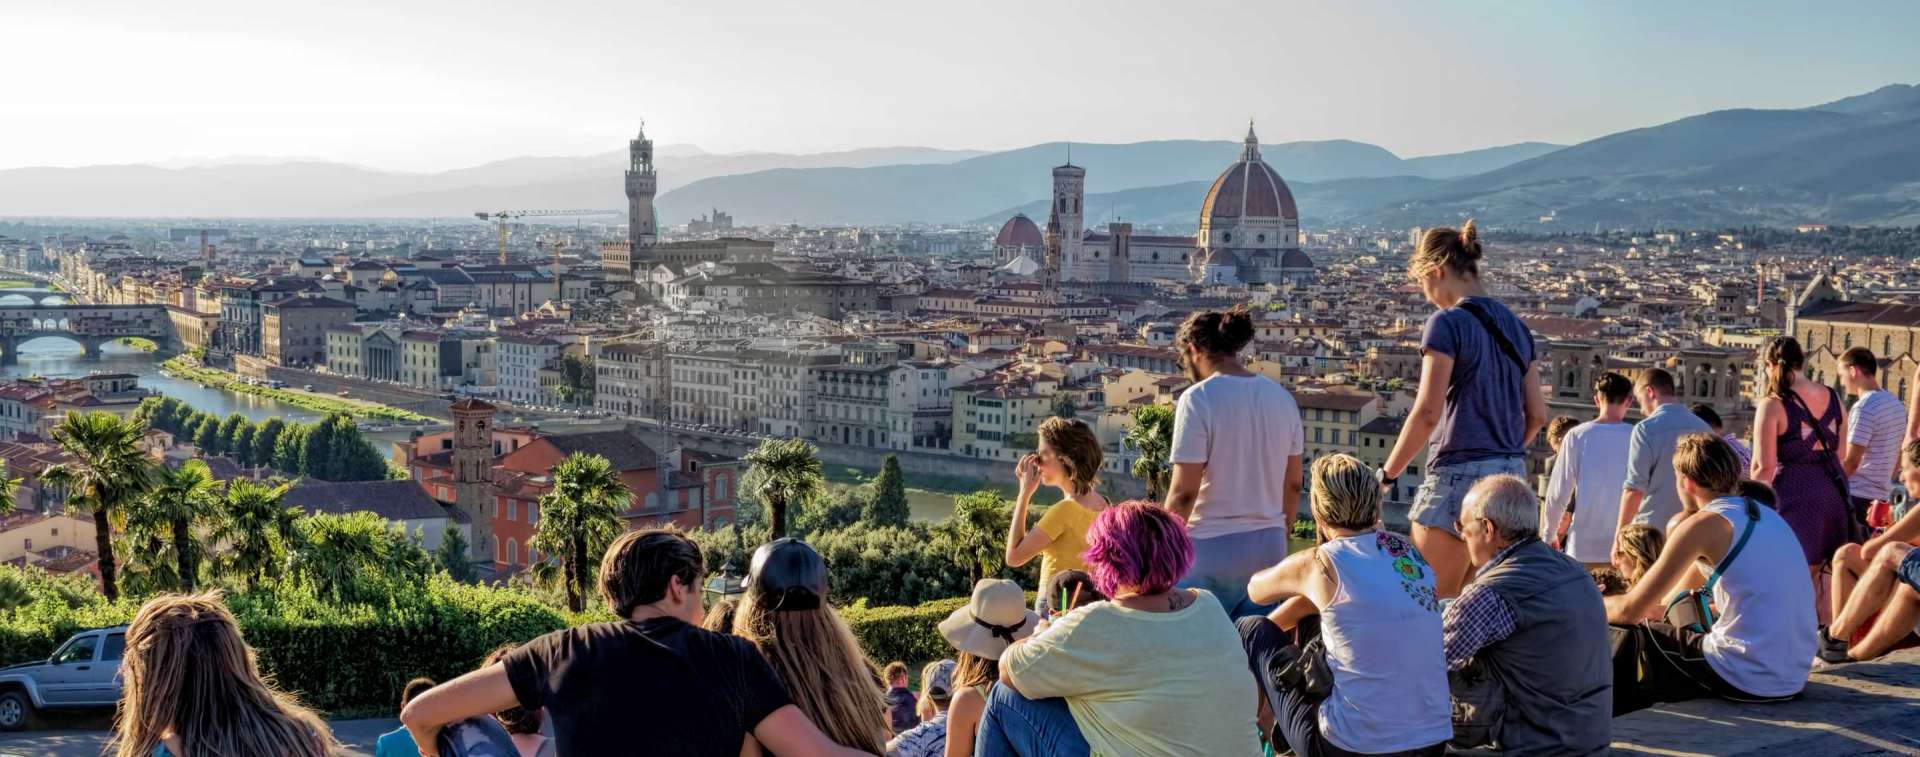 When to Visit Florence | Best Times to Visit Florence | Tuscany Now & More